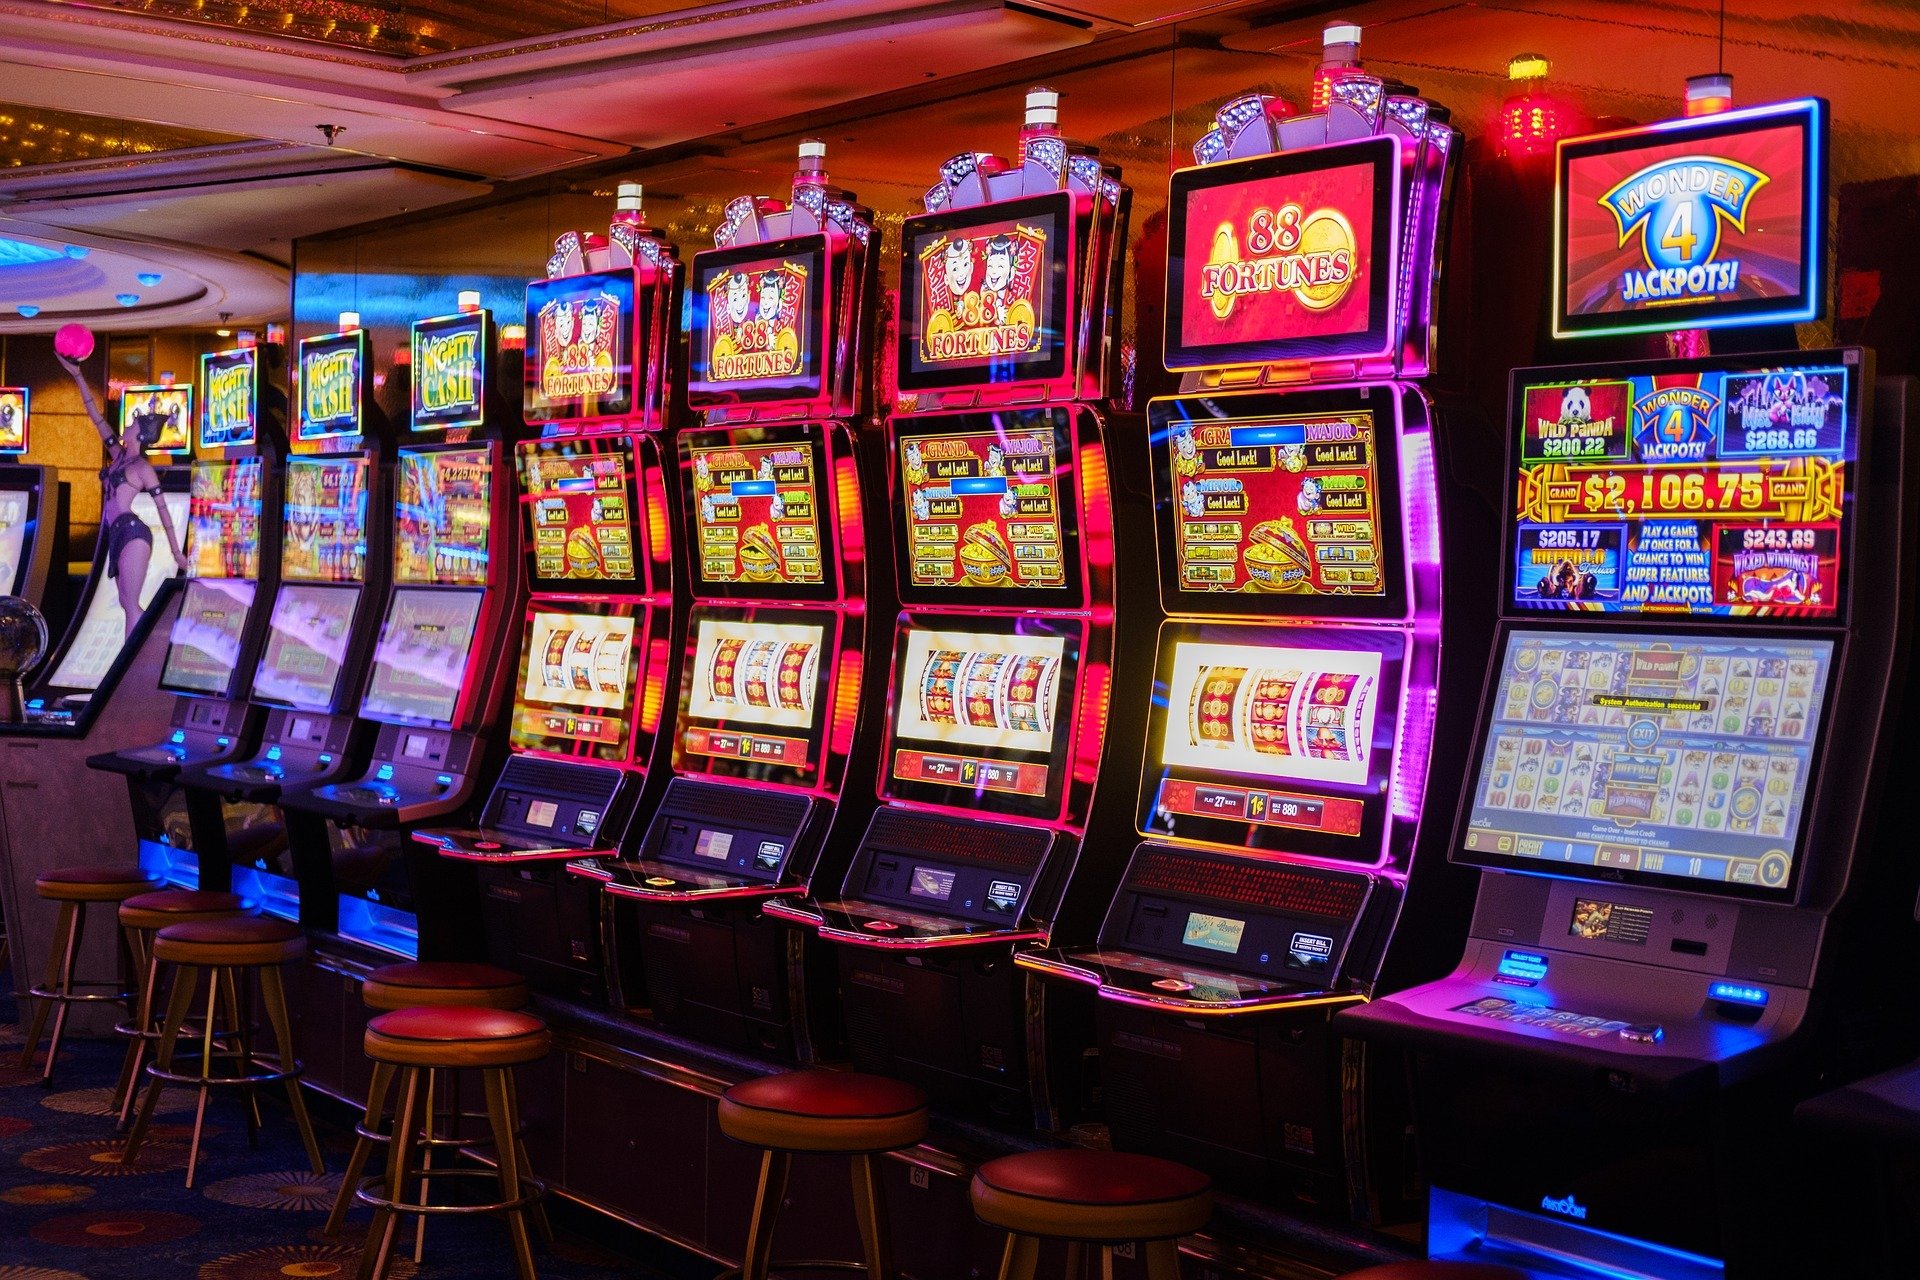 How to find slot machines that are most likely to hit